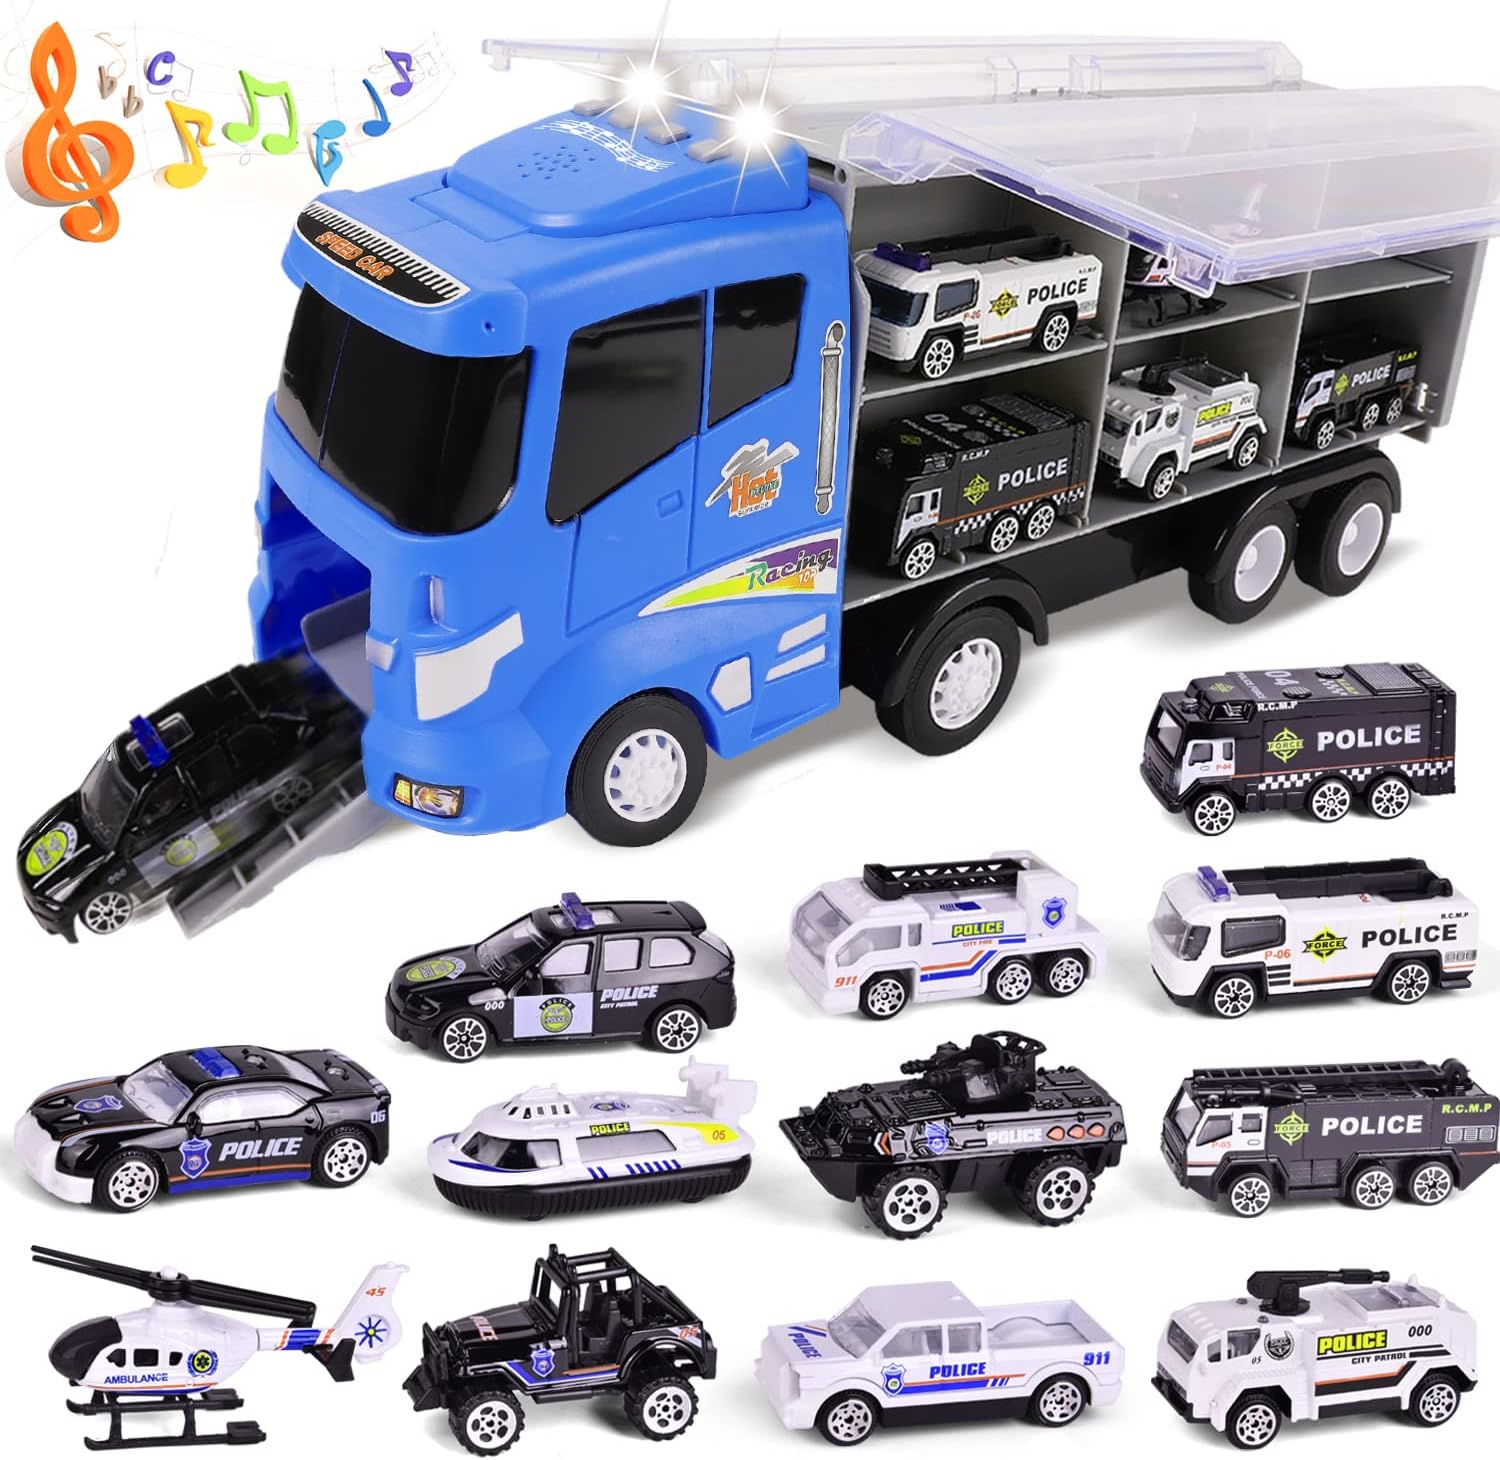 fun little toys police car review